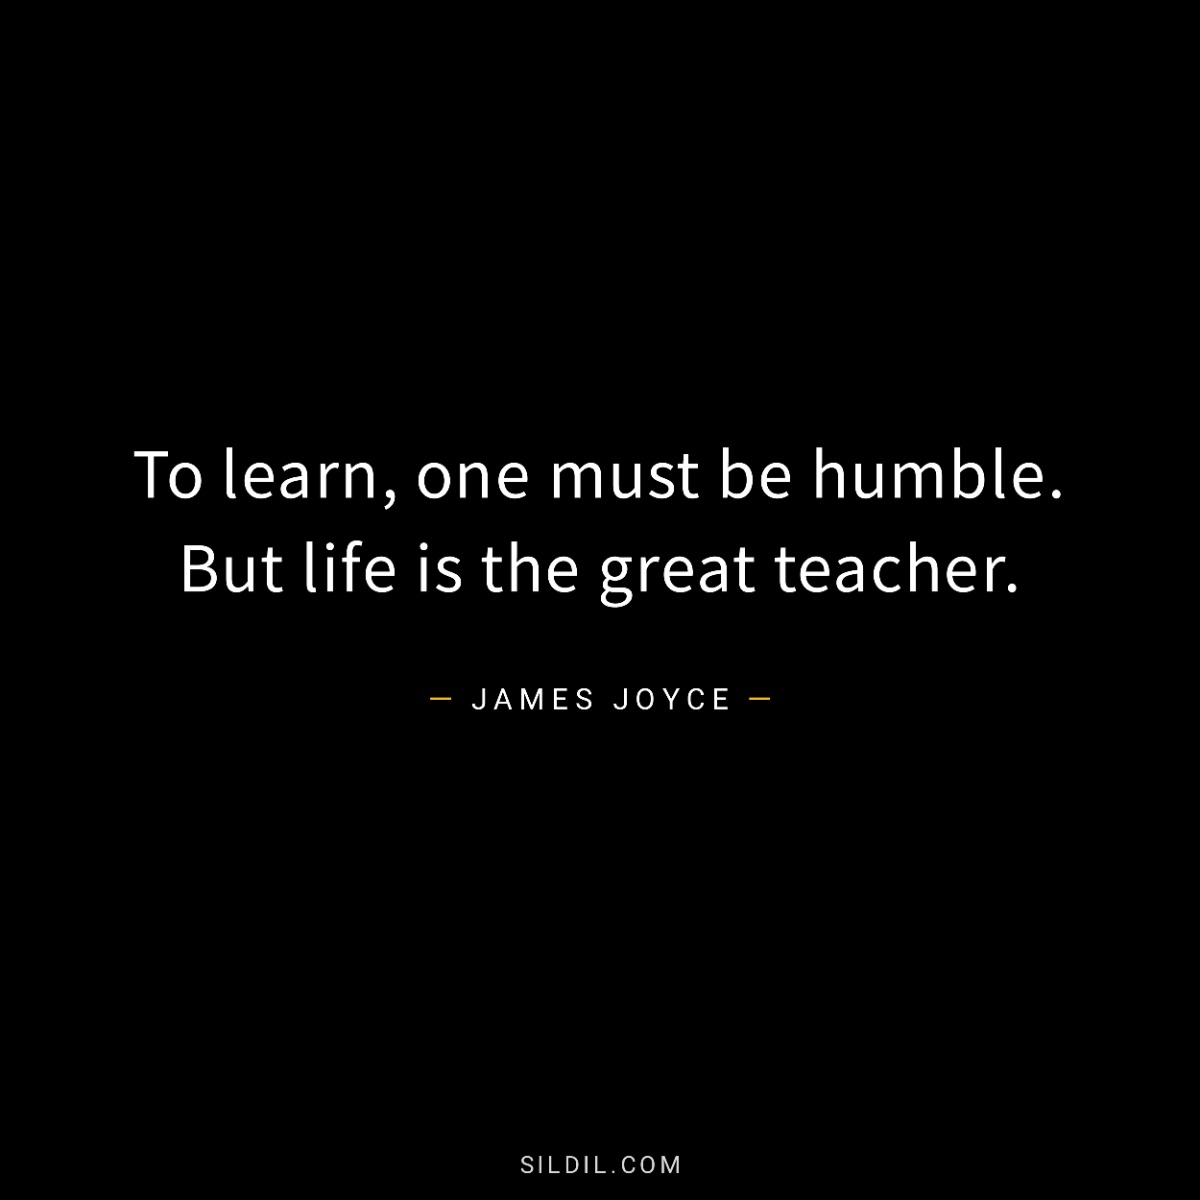 To learn, one must be humble. But life is the great teacher.